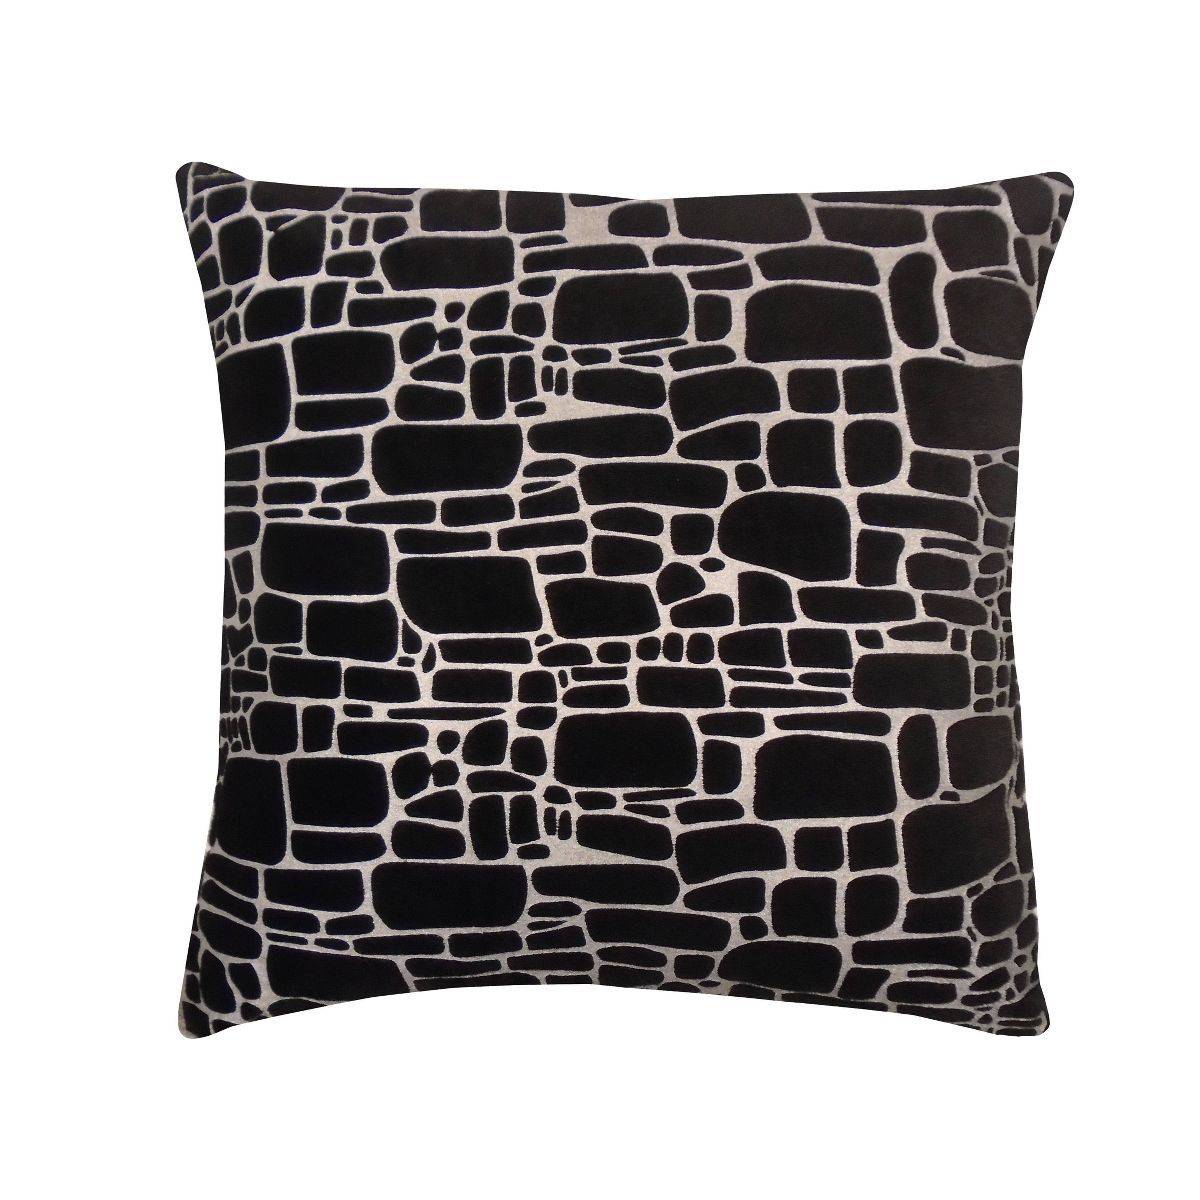 20"x20" Oversize Printed Faux Fur Square Throw Pillow Black/Silver - Edie@Home | Target